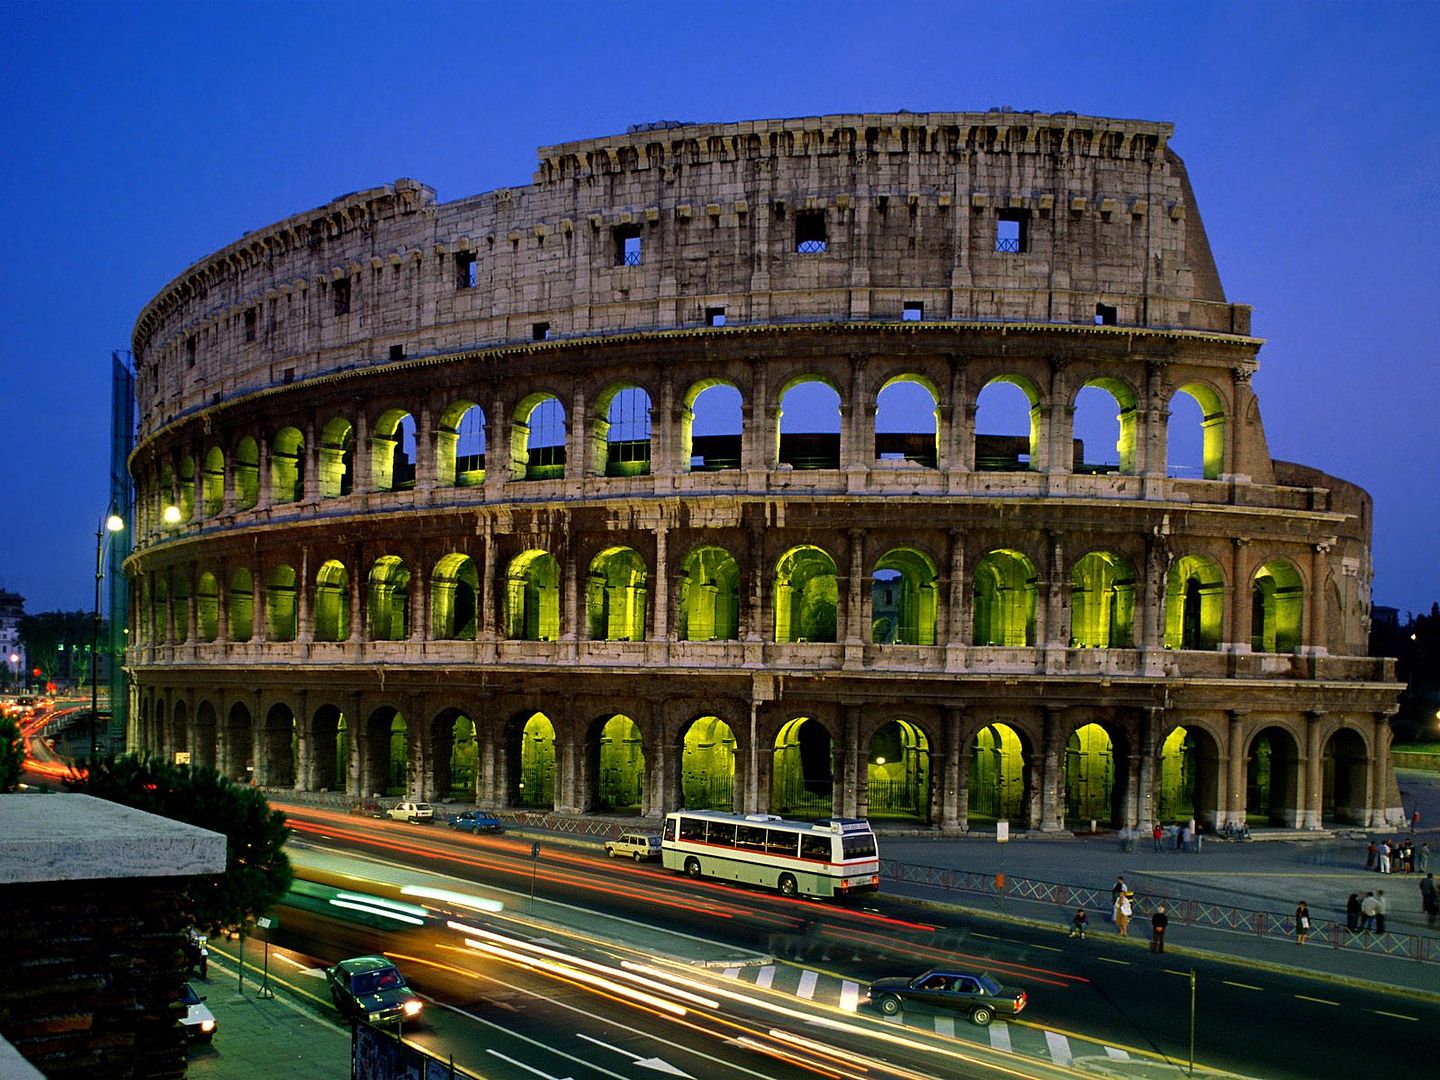 Coliseum Pictures, Images and
Photos